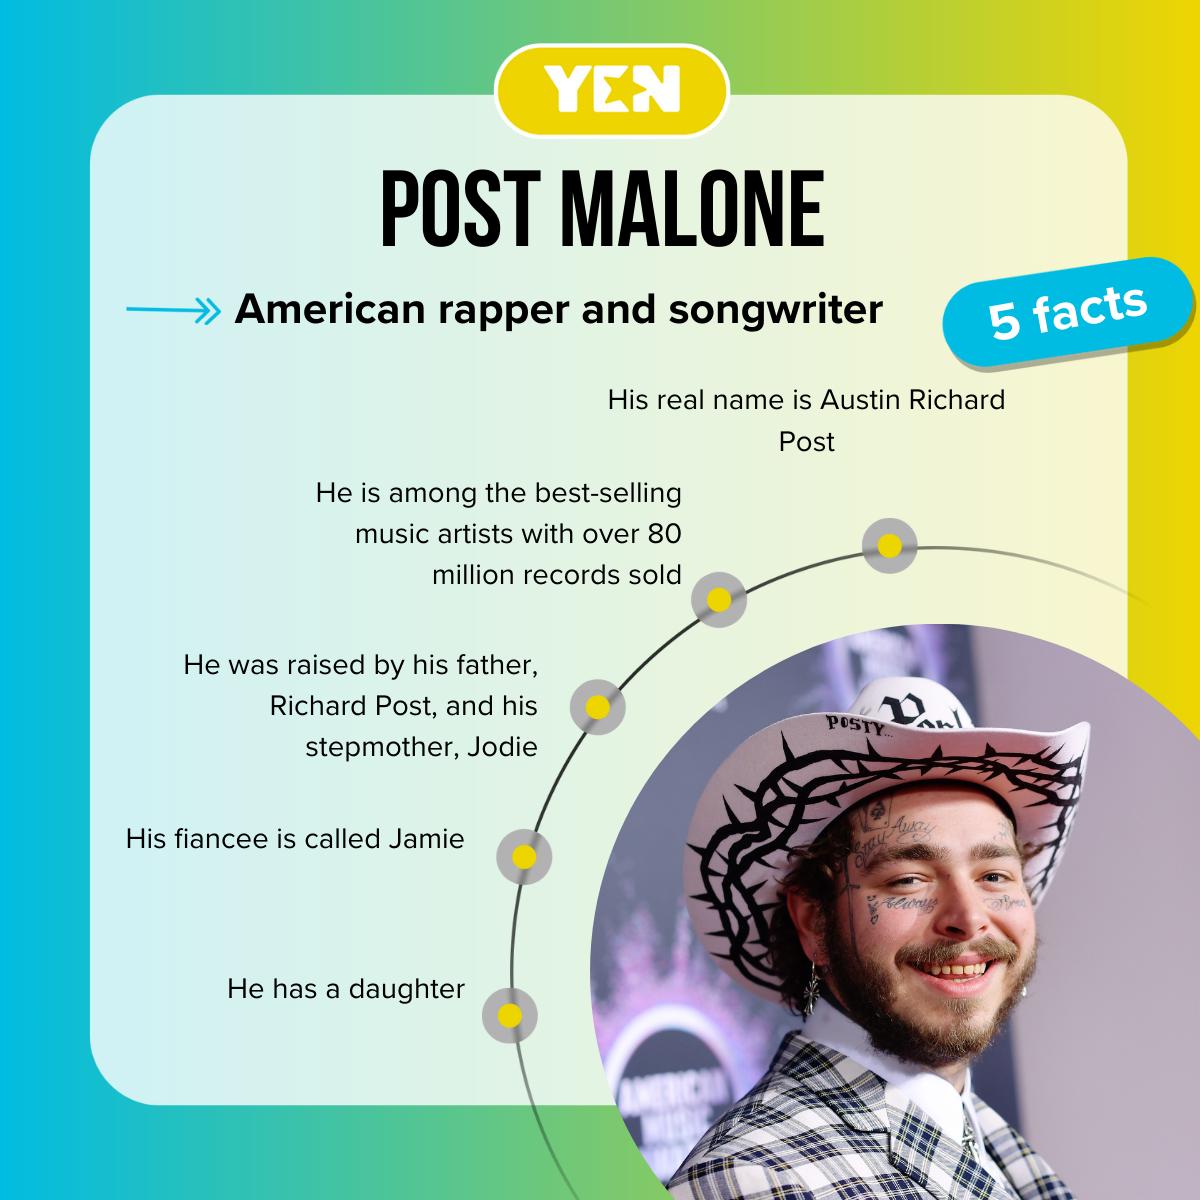 Top-5 facts about Post Malone